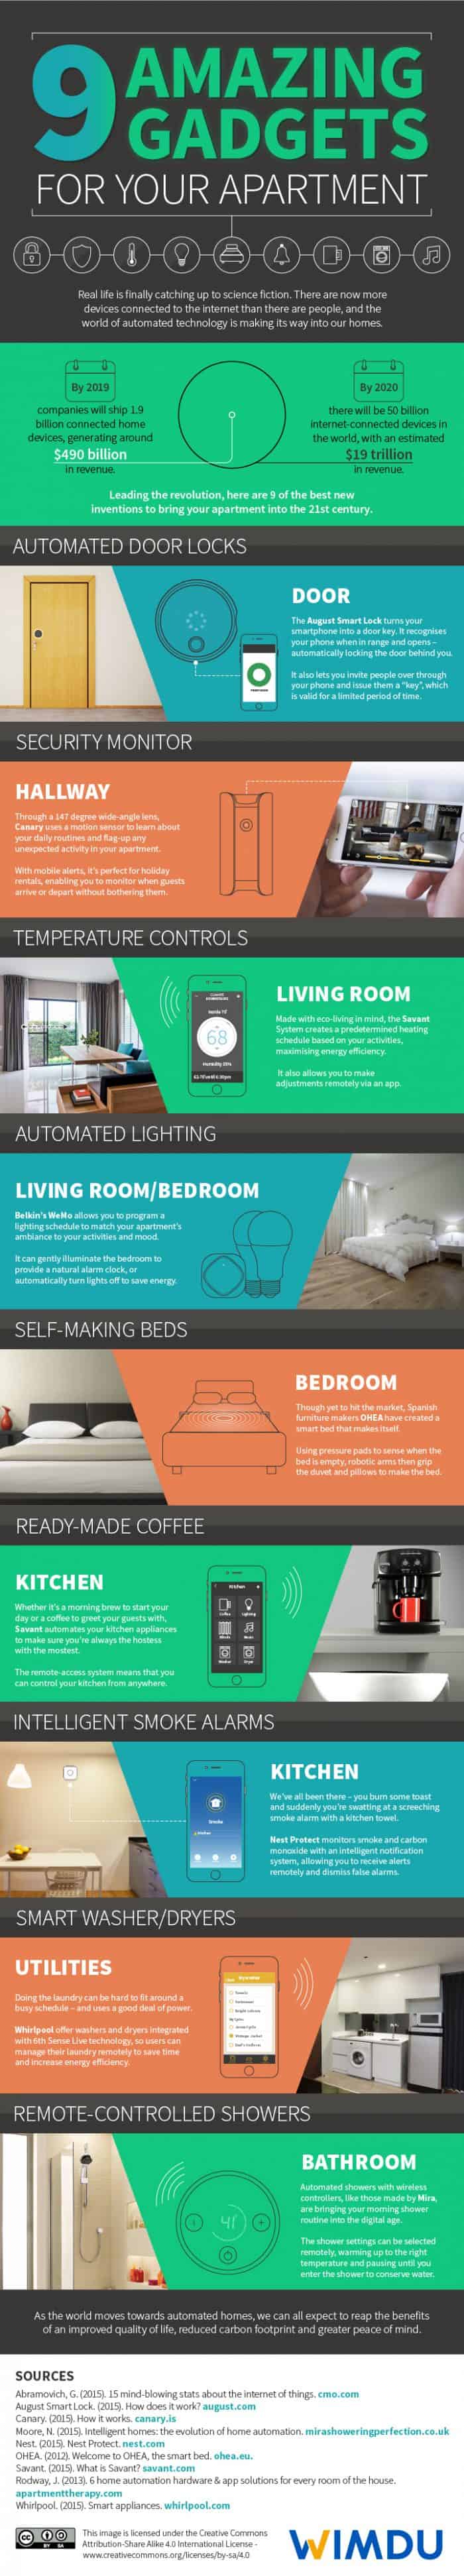 9 Amazing Gadgets for Your Apartment Infographic